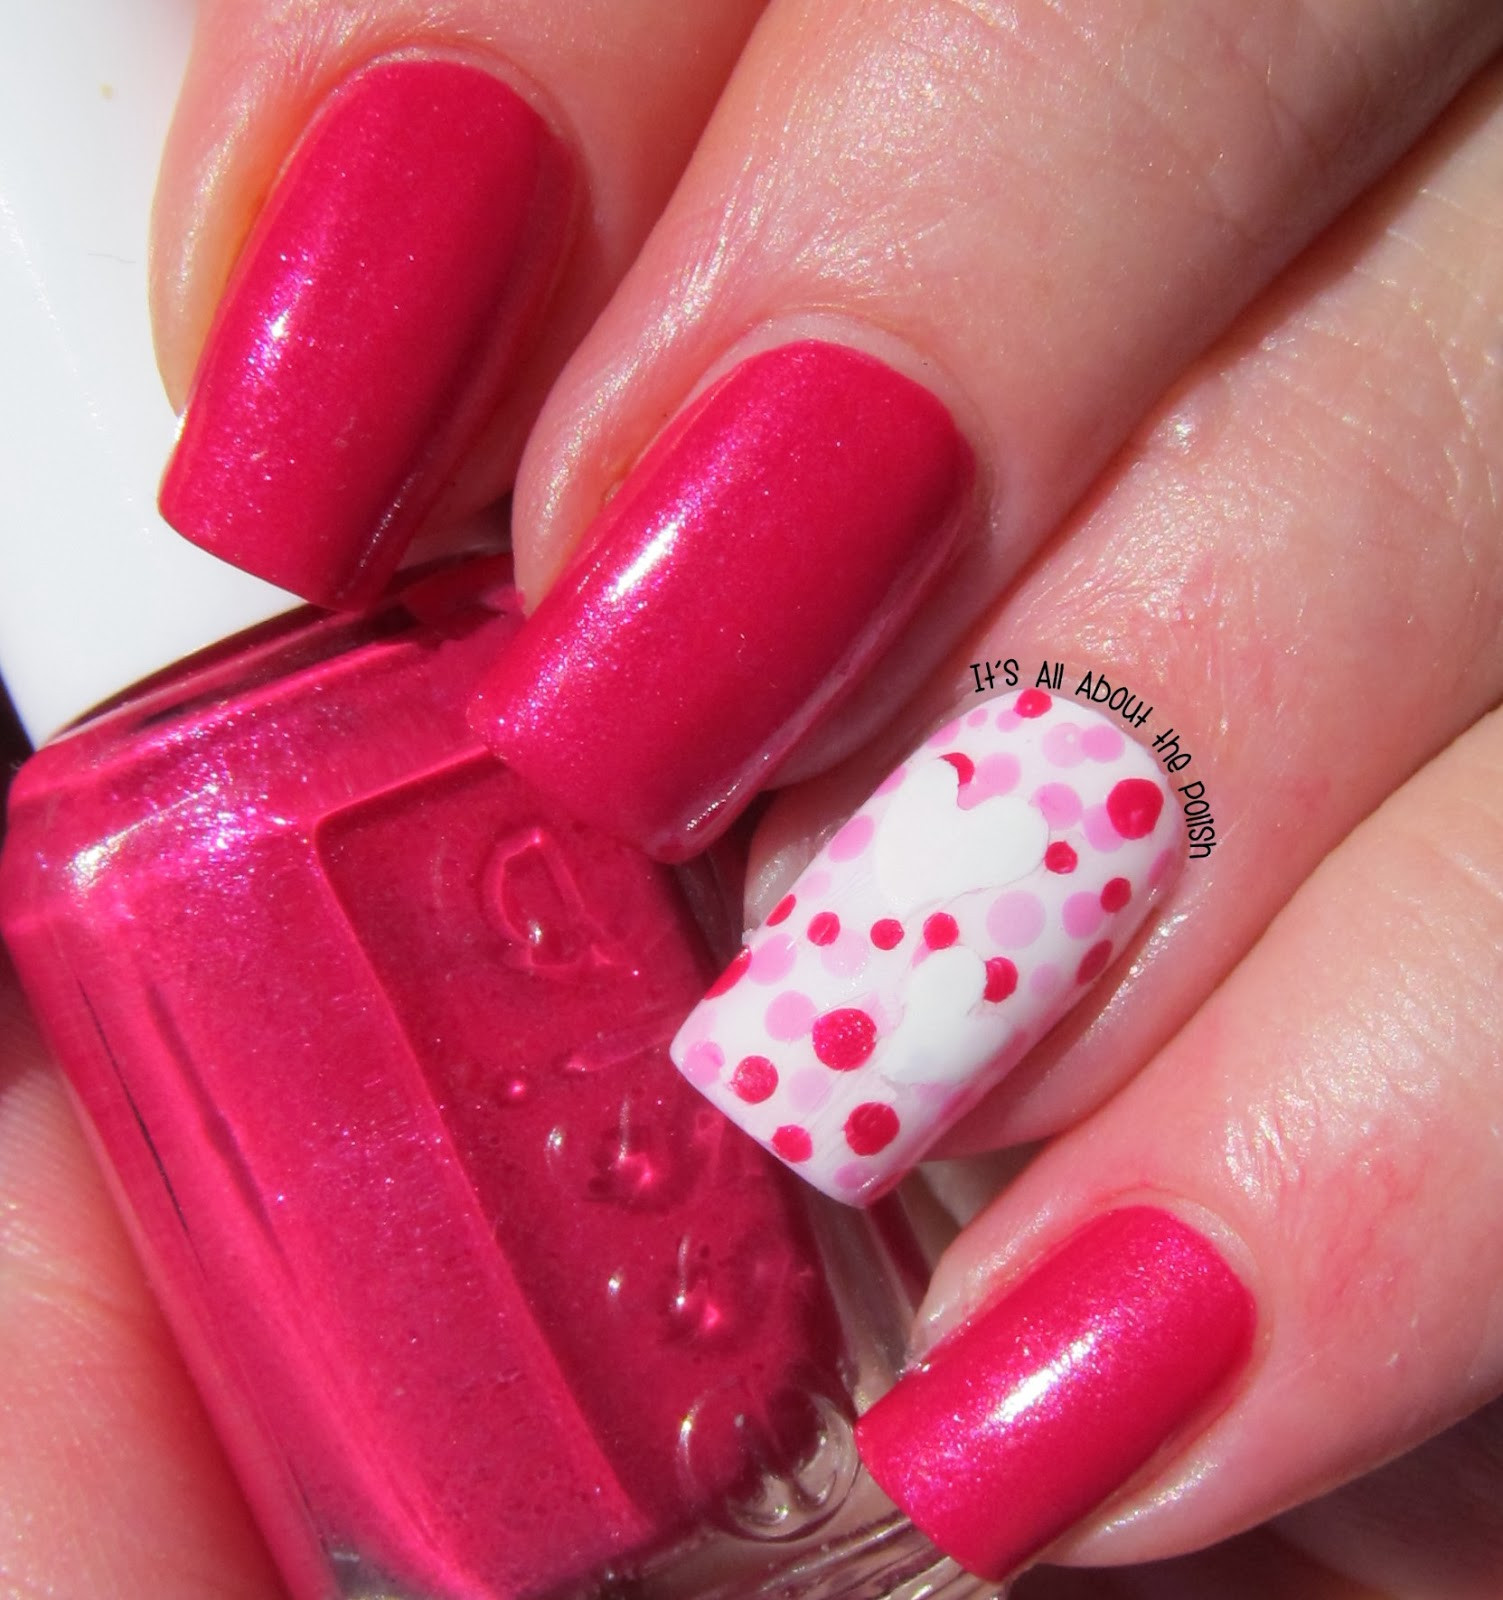 February Nail Colors
 It s all about the polish Dotticure Valentine s Day Nail